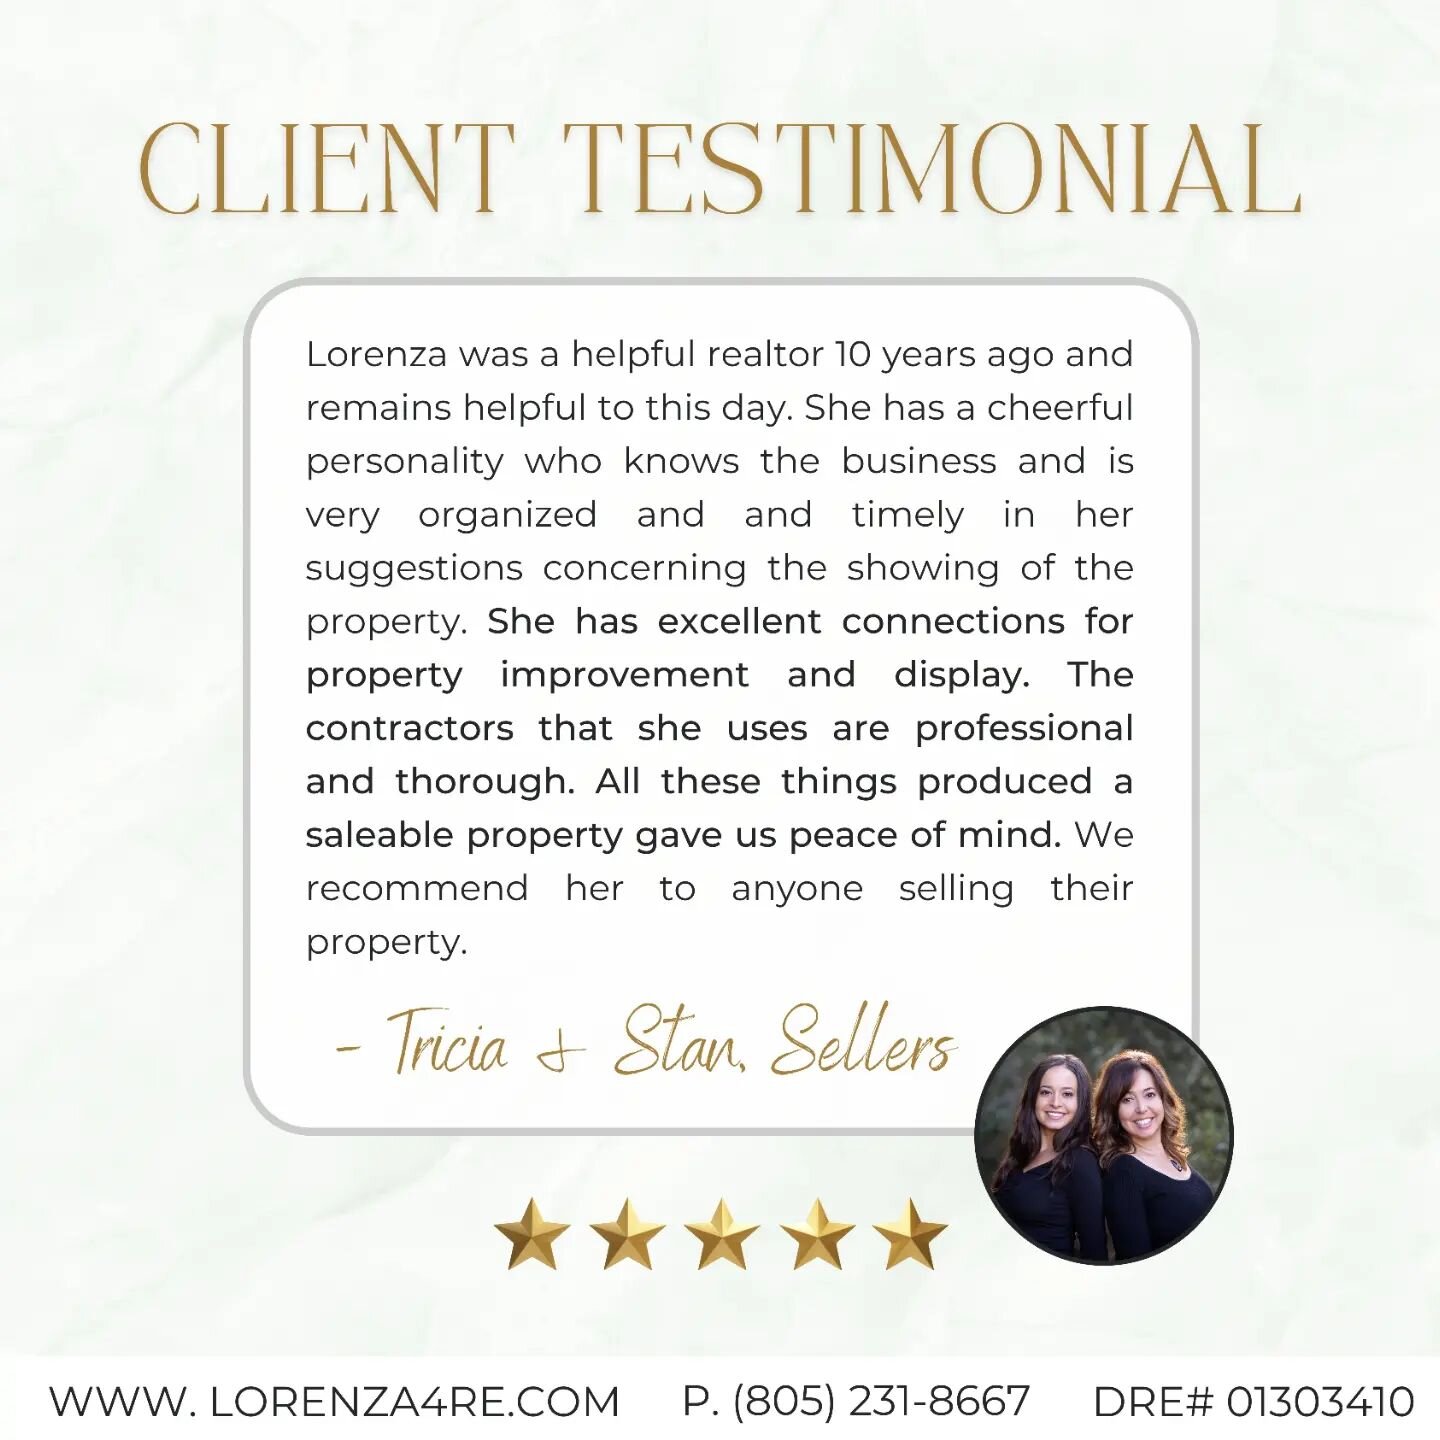 ✨️ Testimonial Tuesday! ✨

 A heartfelt thank you to our incredible clients for their kind words and trust in our services! 🤝 Selling their house was an absolute privilege, and we're thrilled to have exceeded their expectations! 🎉🏡 

Lorenza Rinal